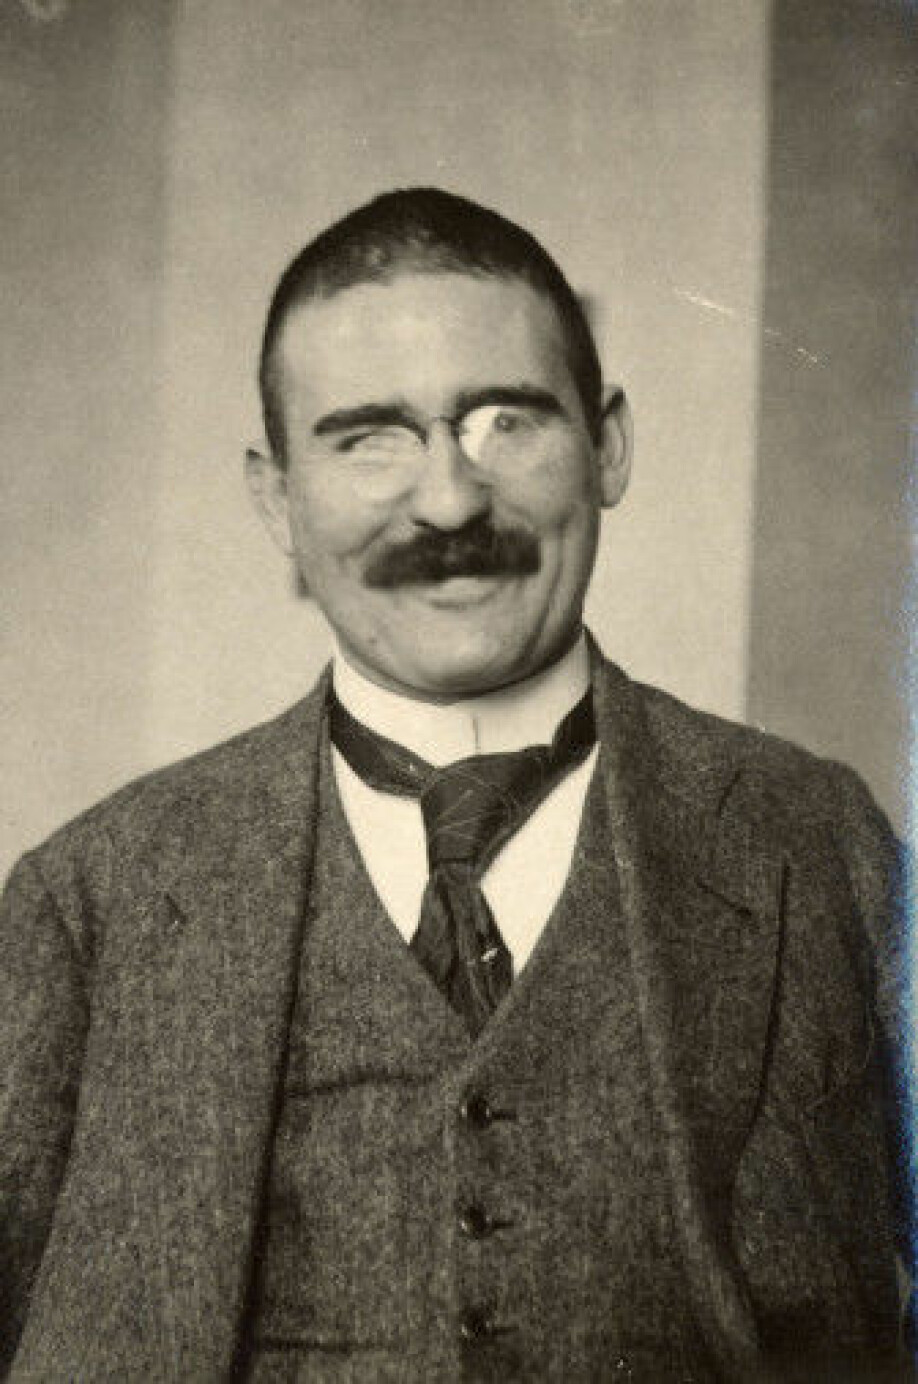 Victor Moritz Goldschmidt as a young researcher around 1920.